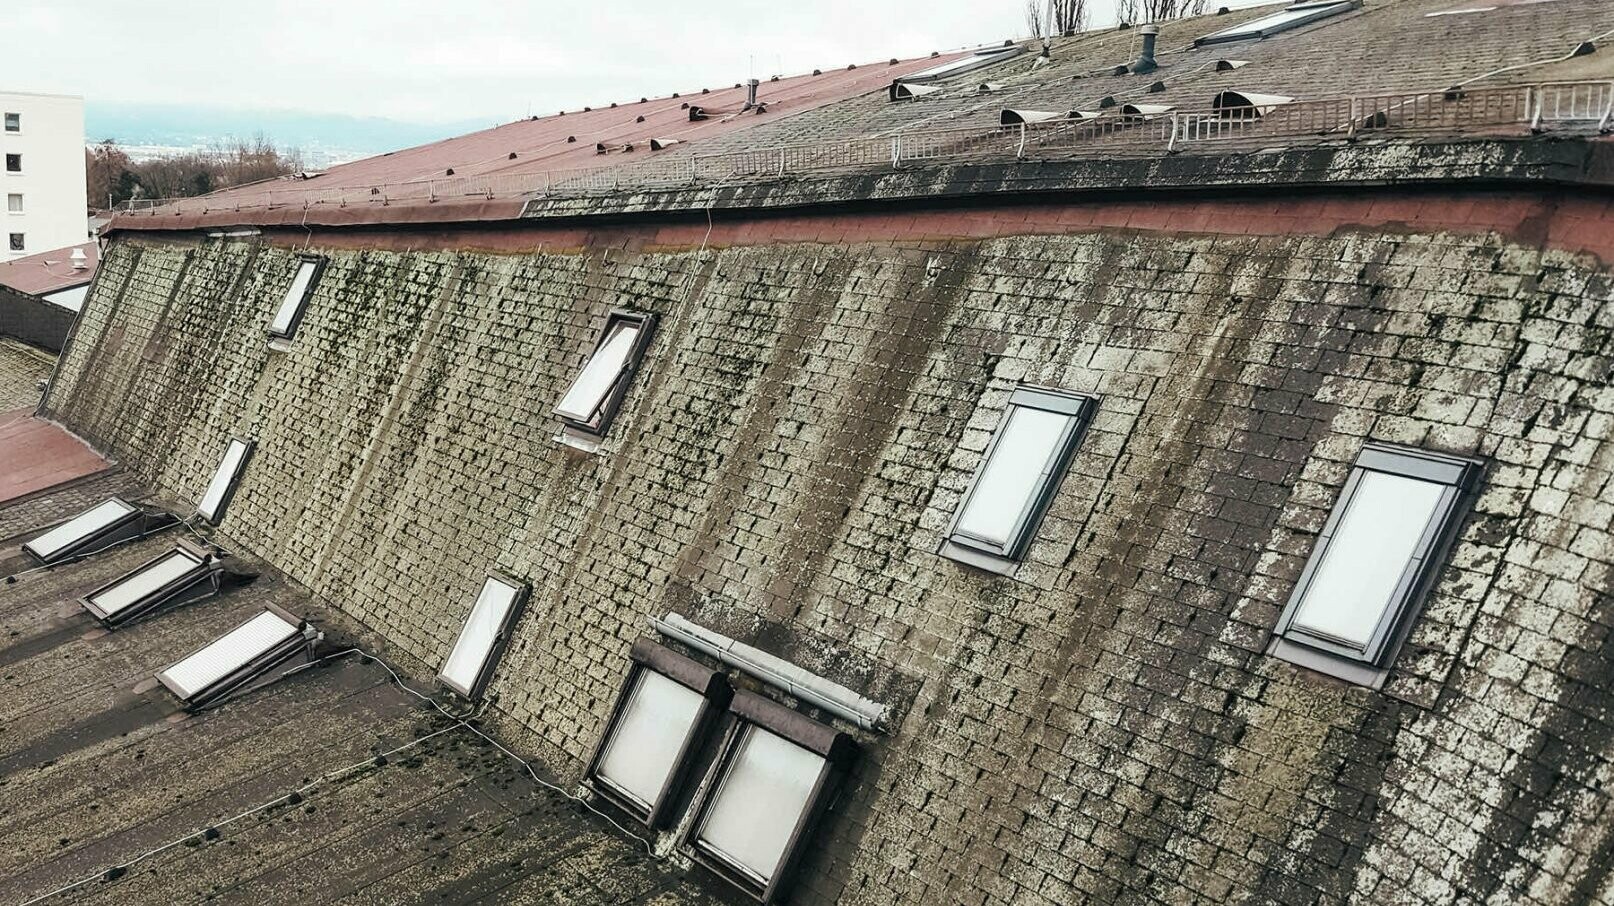 [Translate to english:] The old roof with thick bitumen shingles. The picture also shows the various skylights.